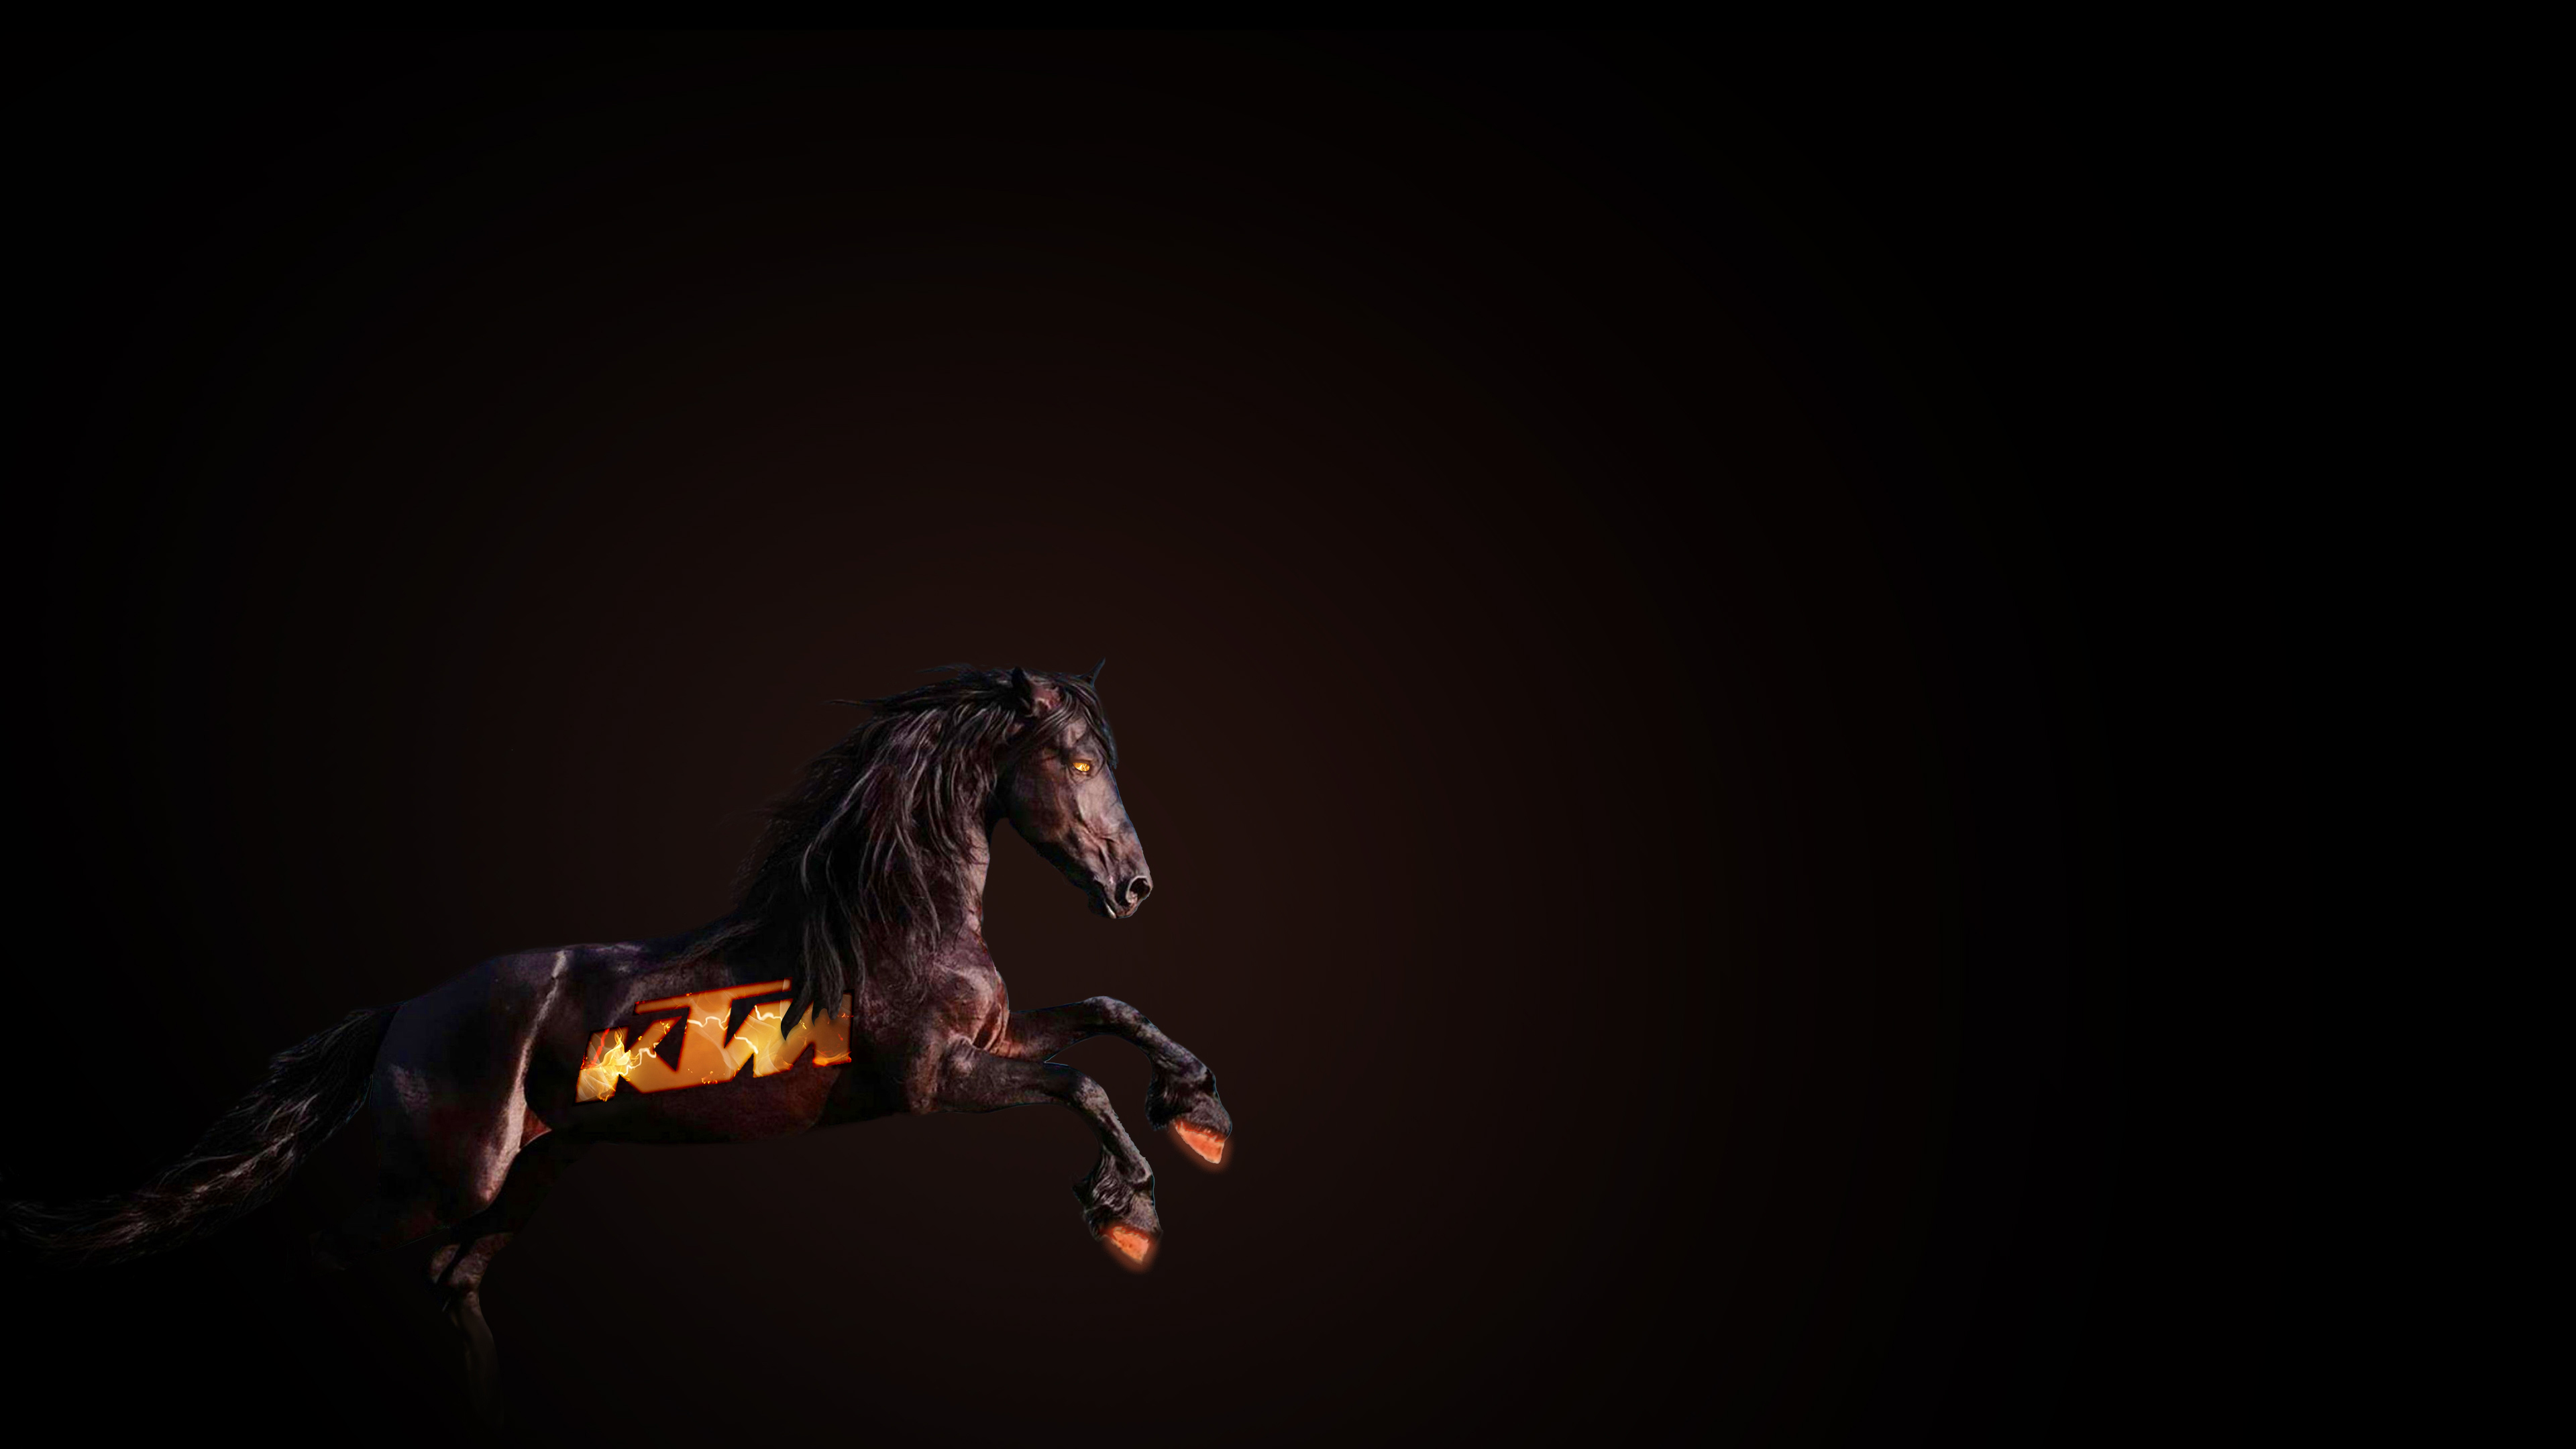 Ktm Horse, HD Funny, 4k Wallpapers, Images, Backgrounds ...